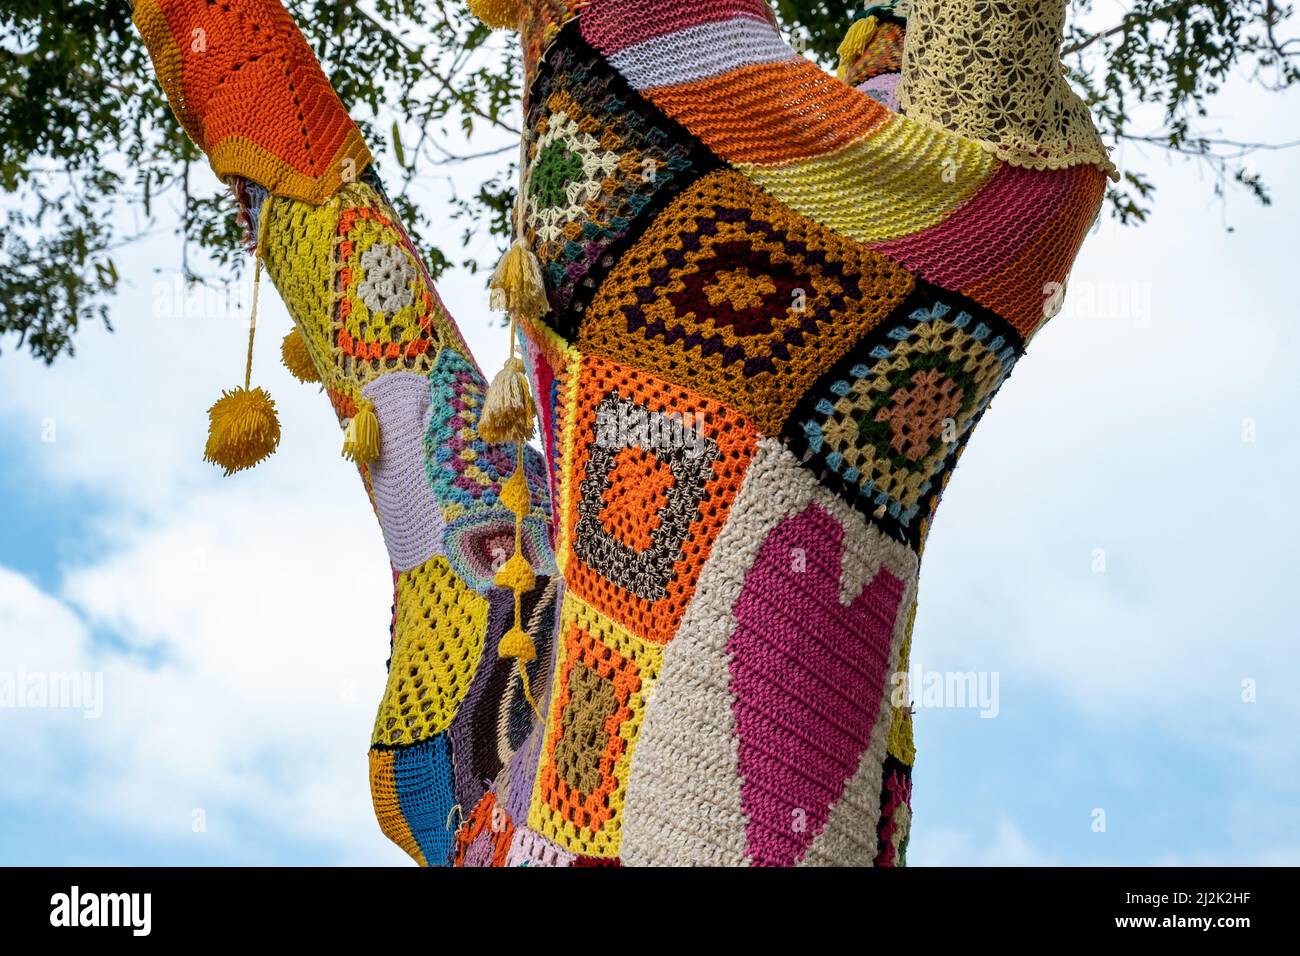 Colorful crochet knit on a tree trunk yarn bombing. Patchwork knitted  crochet covered tree for warmth, protection and decoration. High resolution  Stock Photo - Alamy